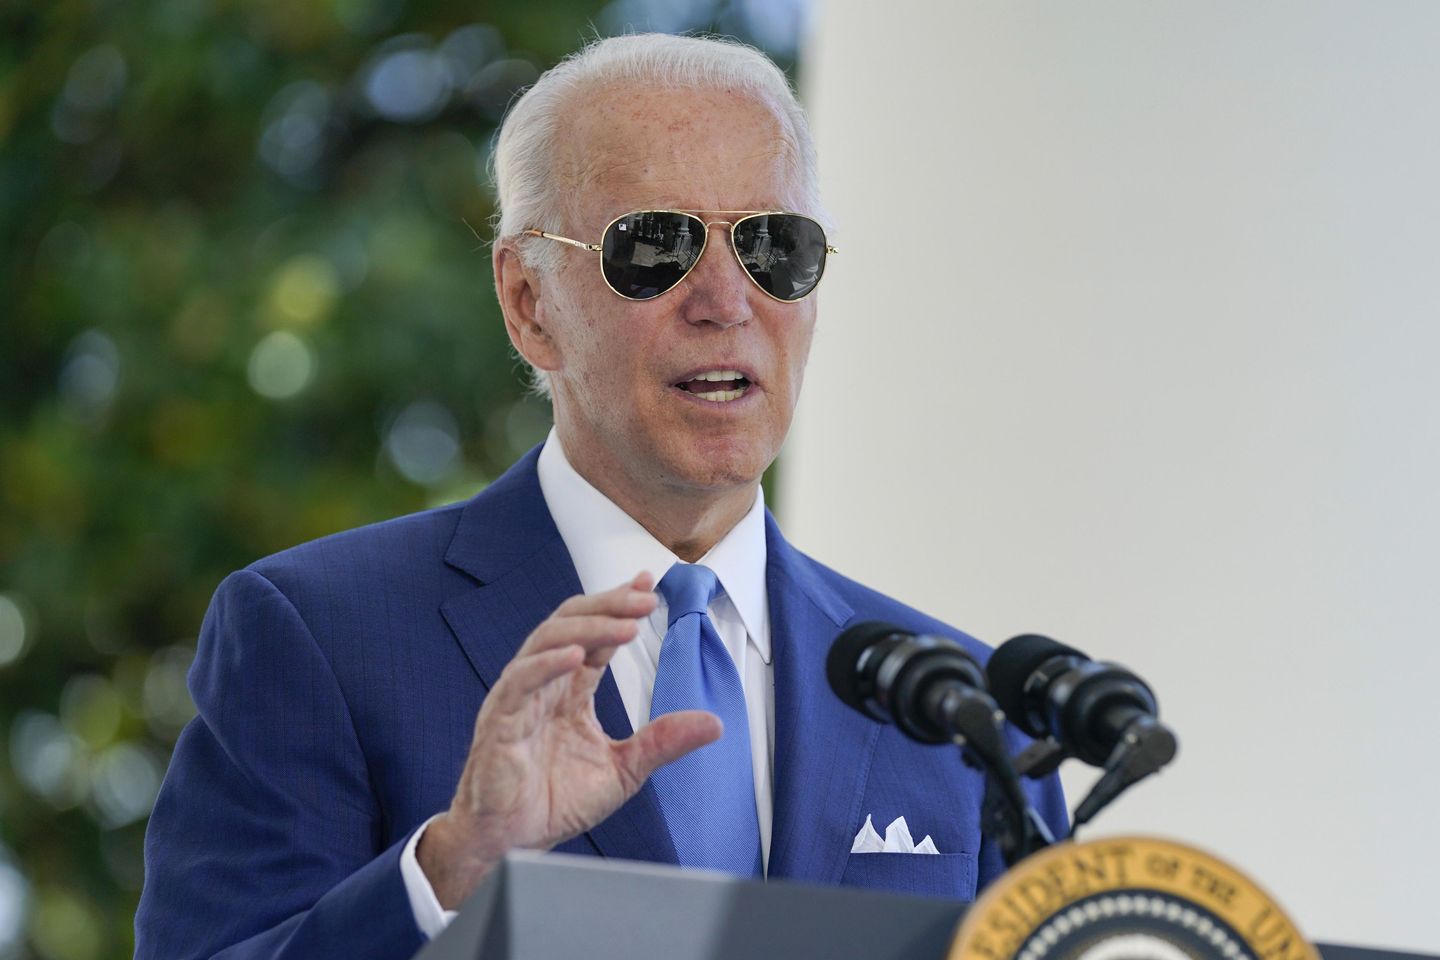 Joe Biden tests negative for COVID-19, will remain in isolation pending second test